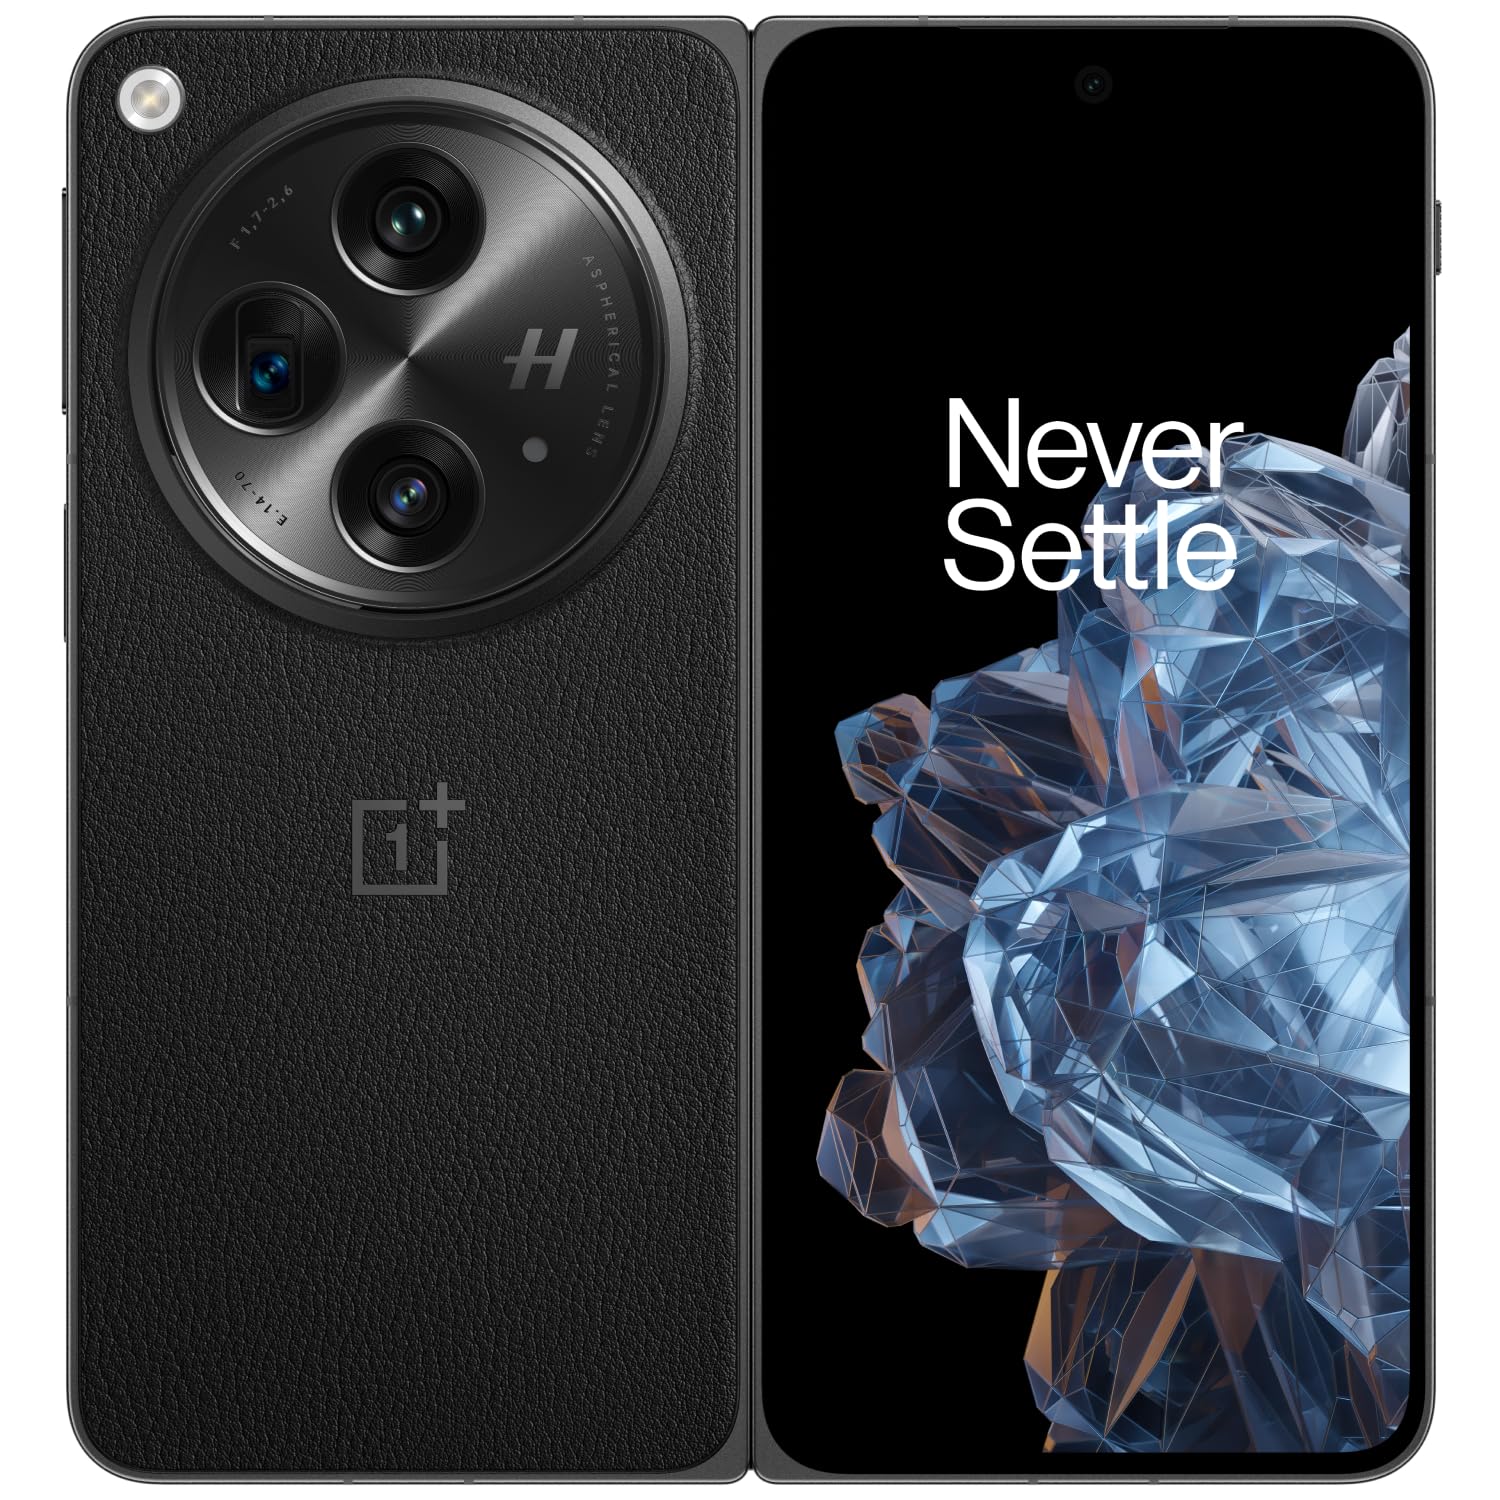 OnePlus Open, 16GB RAM+512GB, Dual-SIM, Voyager Black, US Factory Unlocked Android Smartphone, 4805 mAh Battery, 67W Fast Charging, Hasselblad Camera, 120Hz Fluid Display